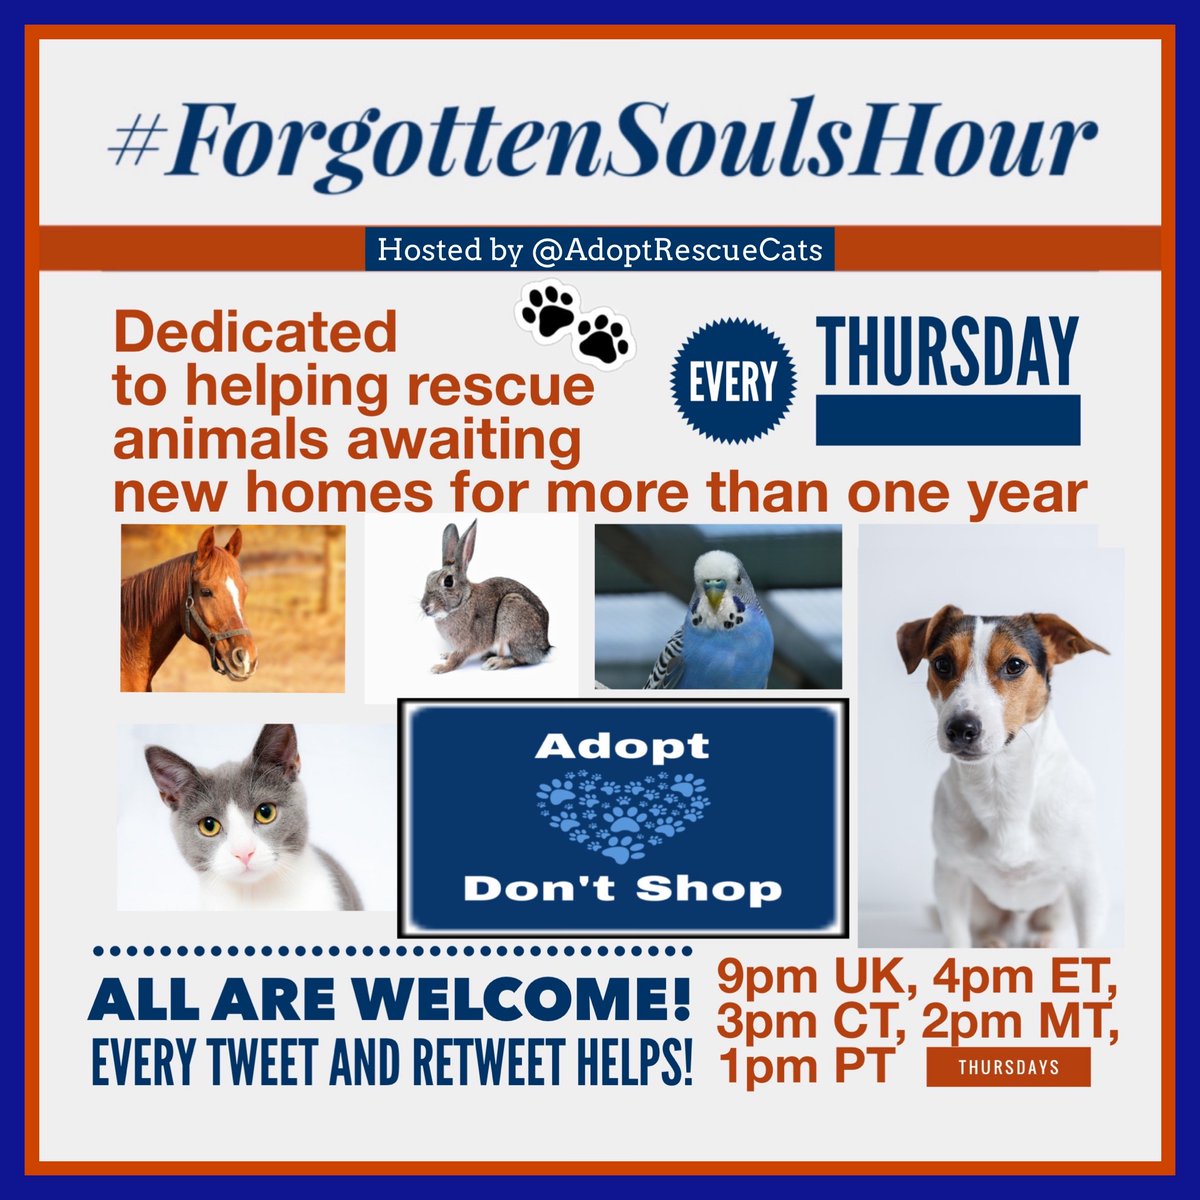 Join in with #forgottensoulshour to help long term animals in rescue (1 year+)
Every Thursday
9pm UK
4pm ET
3pm CT
1pm PT #USA
Lets help find some #foster or #foreverhome 
Hosted by @AdoptRescueCats
Tag your pals&spread the word
All welcome #k9hour #rehomehour